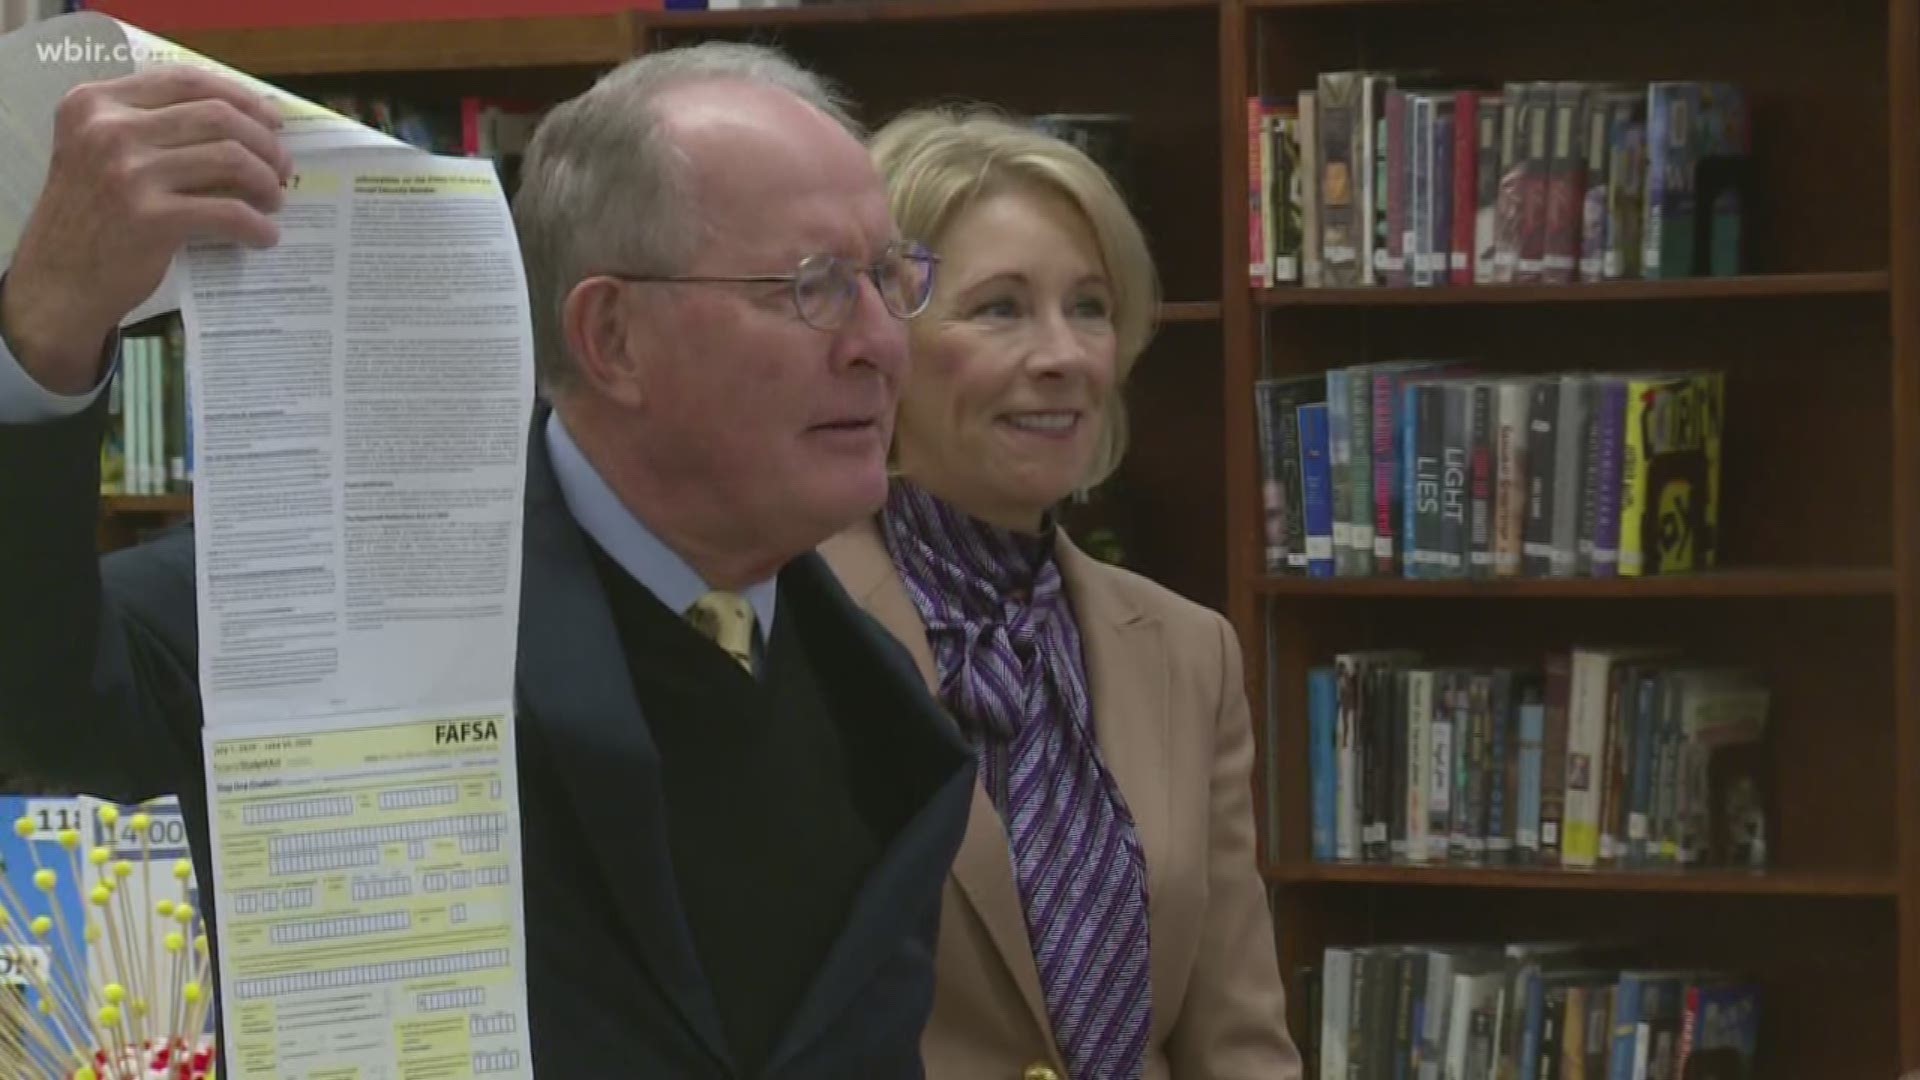 U.S. Education Secretary Betsy DeVos and Senator Lamar Alexander were in Sevier County today showing students how to use a new FAFSA app.